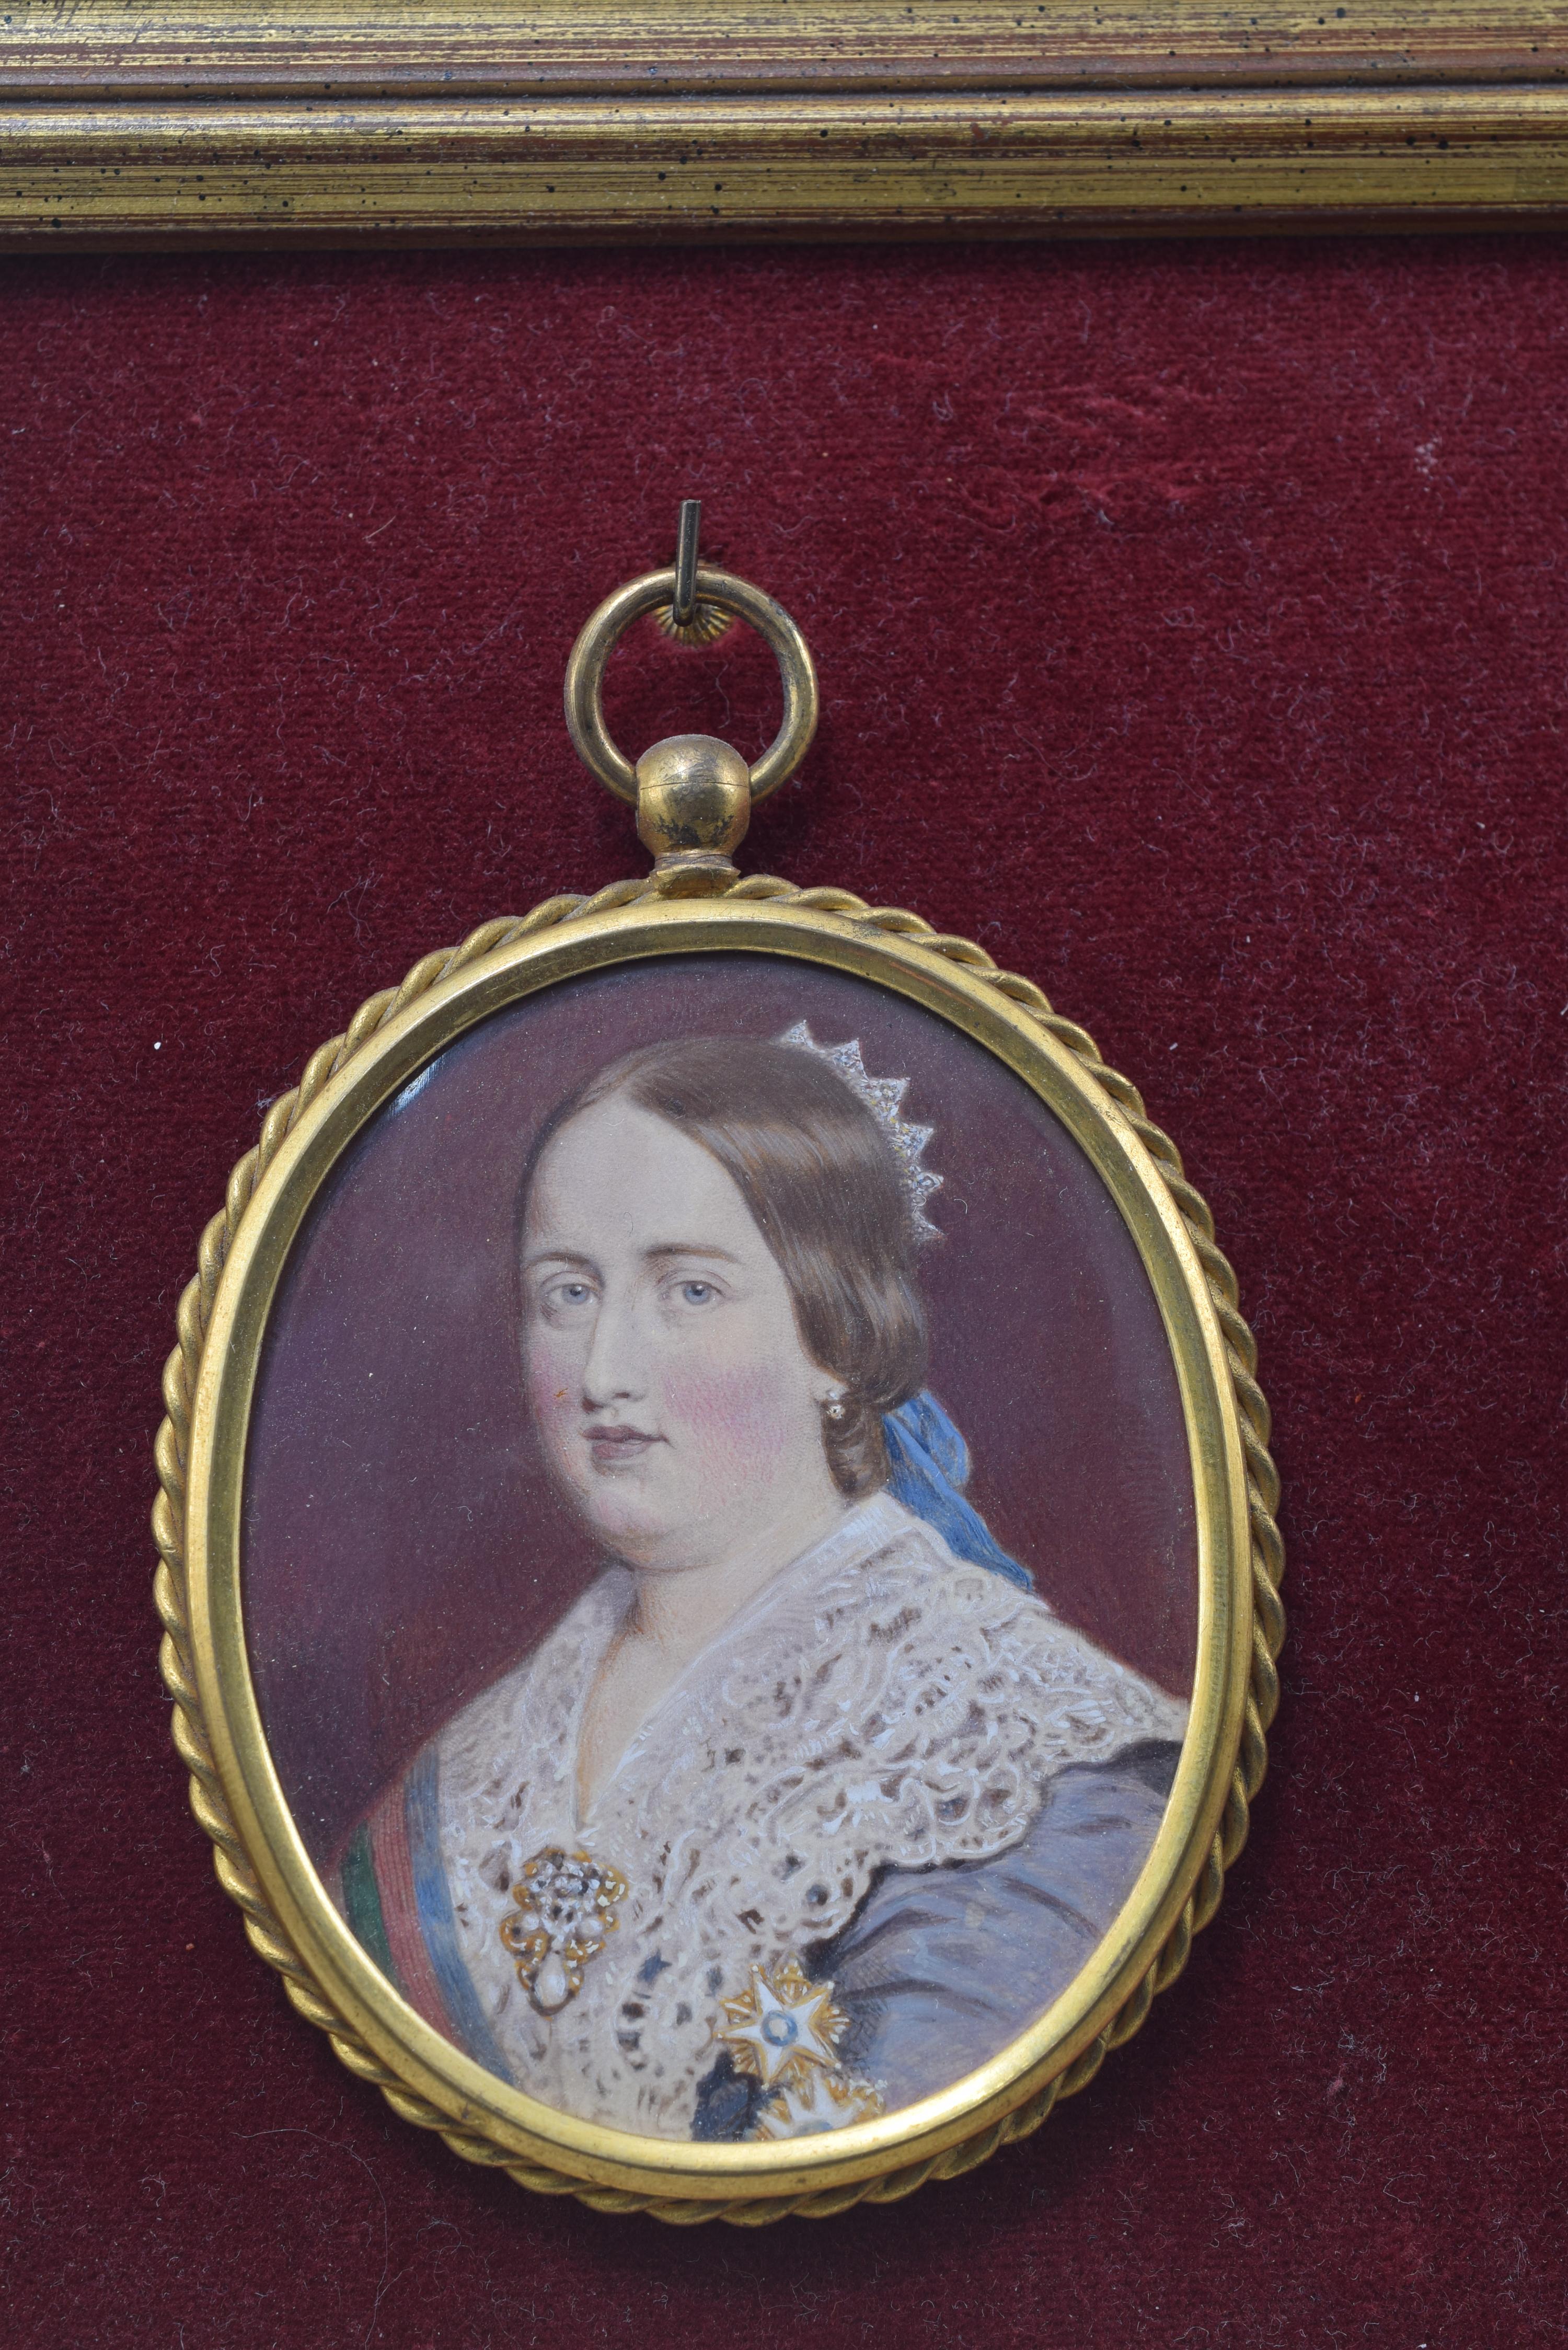 Pair of miniatures in medallions, Ferdinand II of Portugal and Isabel II of Portugal. Cardboard, metal, glass. XIX century.
 Pair of miniatures on cardboard that show the busts of a man and a woman inside medallions, these in turn placed in a frame